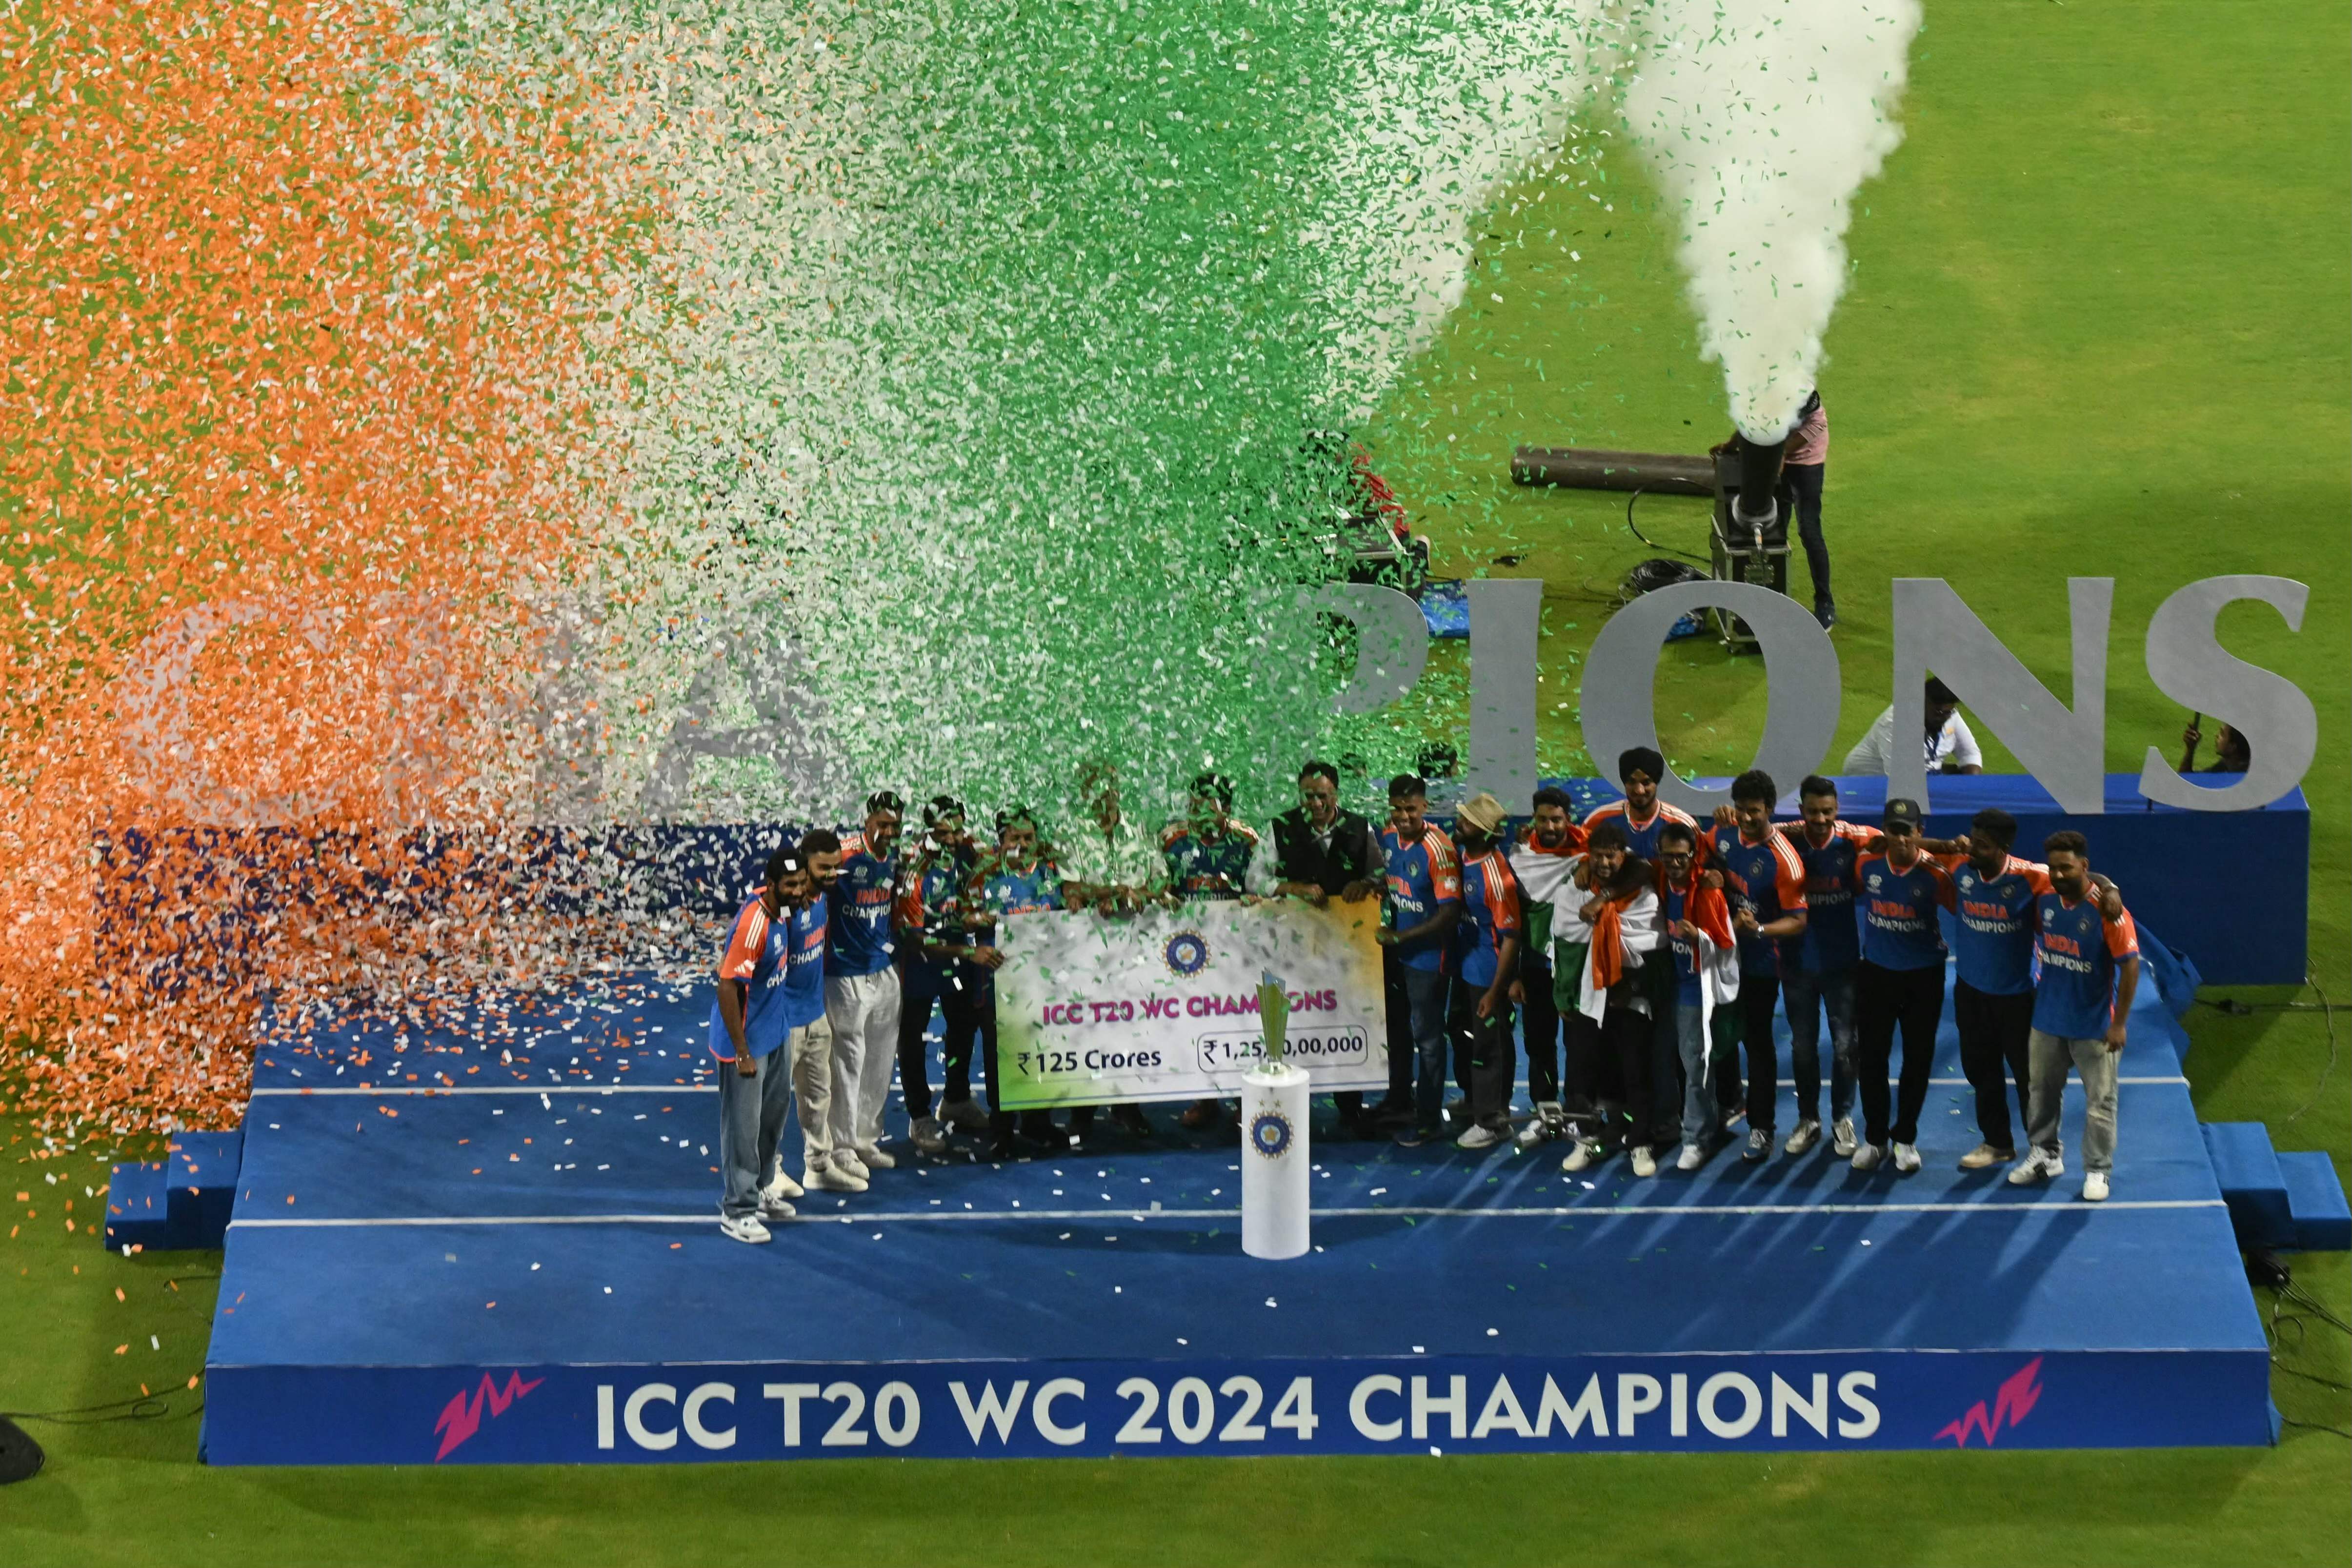 Members of the Indian cricket team stand on a podium during a ceremony at the Wankhede stadium in Mumbai on July 4, 2024, to celebrate India's championship in the ICC men's Twenty20 World Cup 2024 held in Barbados. (Photo by AFP)